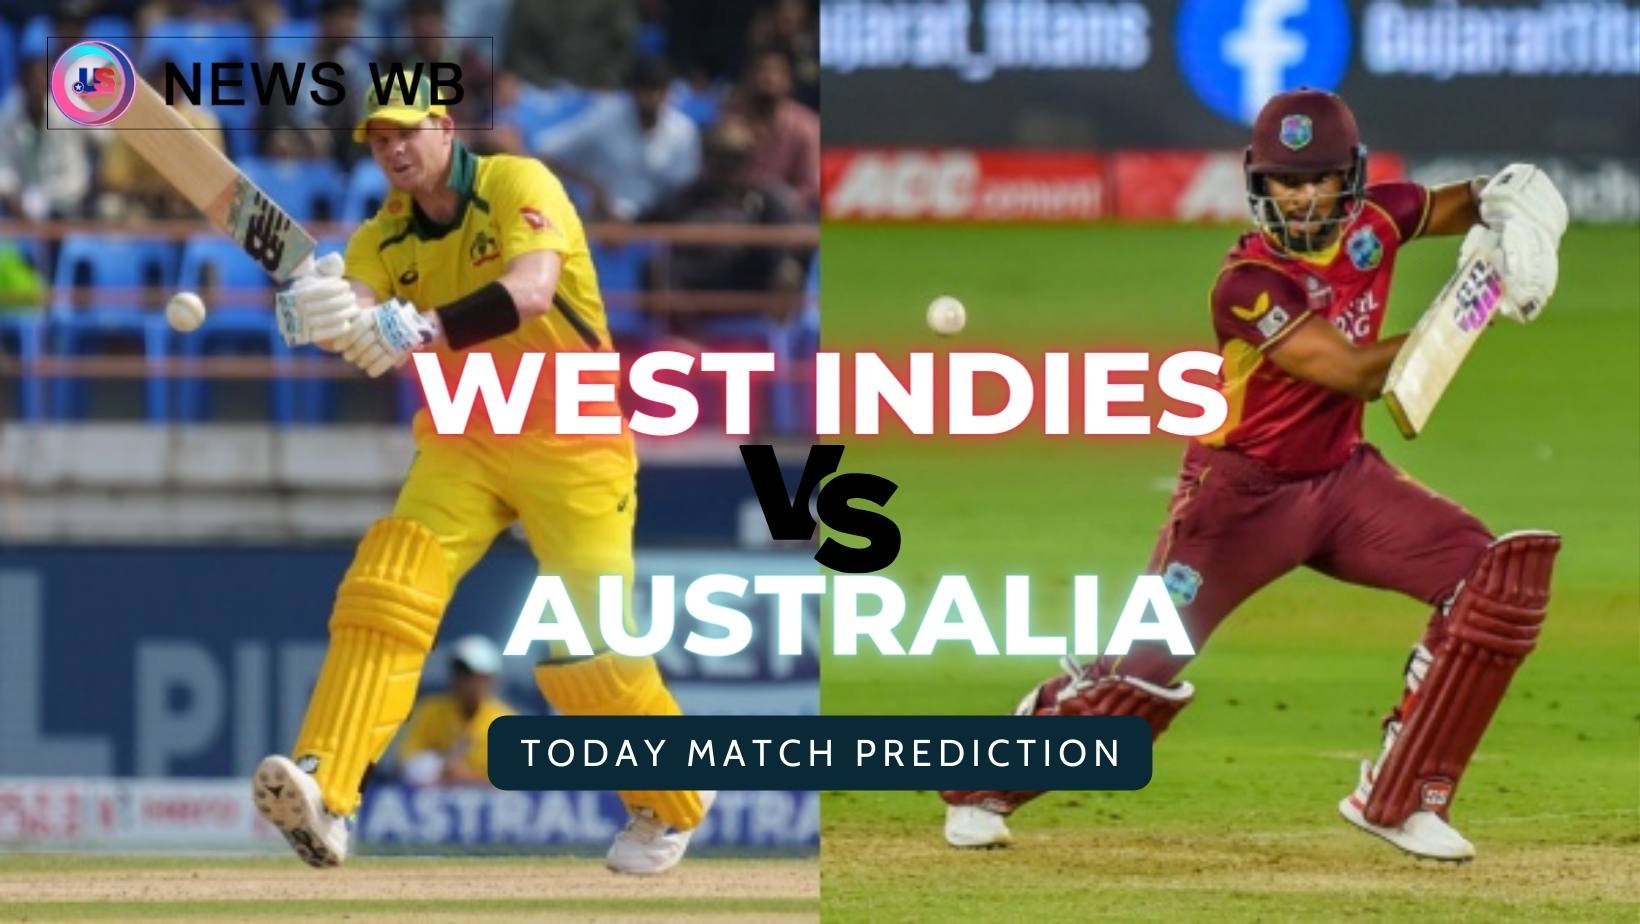 Today Match Prediction: AUS vs WI Dream11 Team, Australia vs West Indies 3rd T20I, Who Will Win?